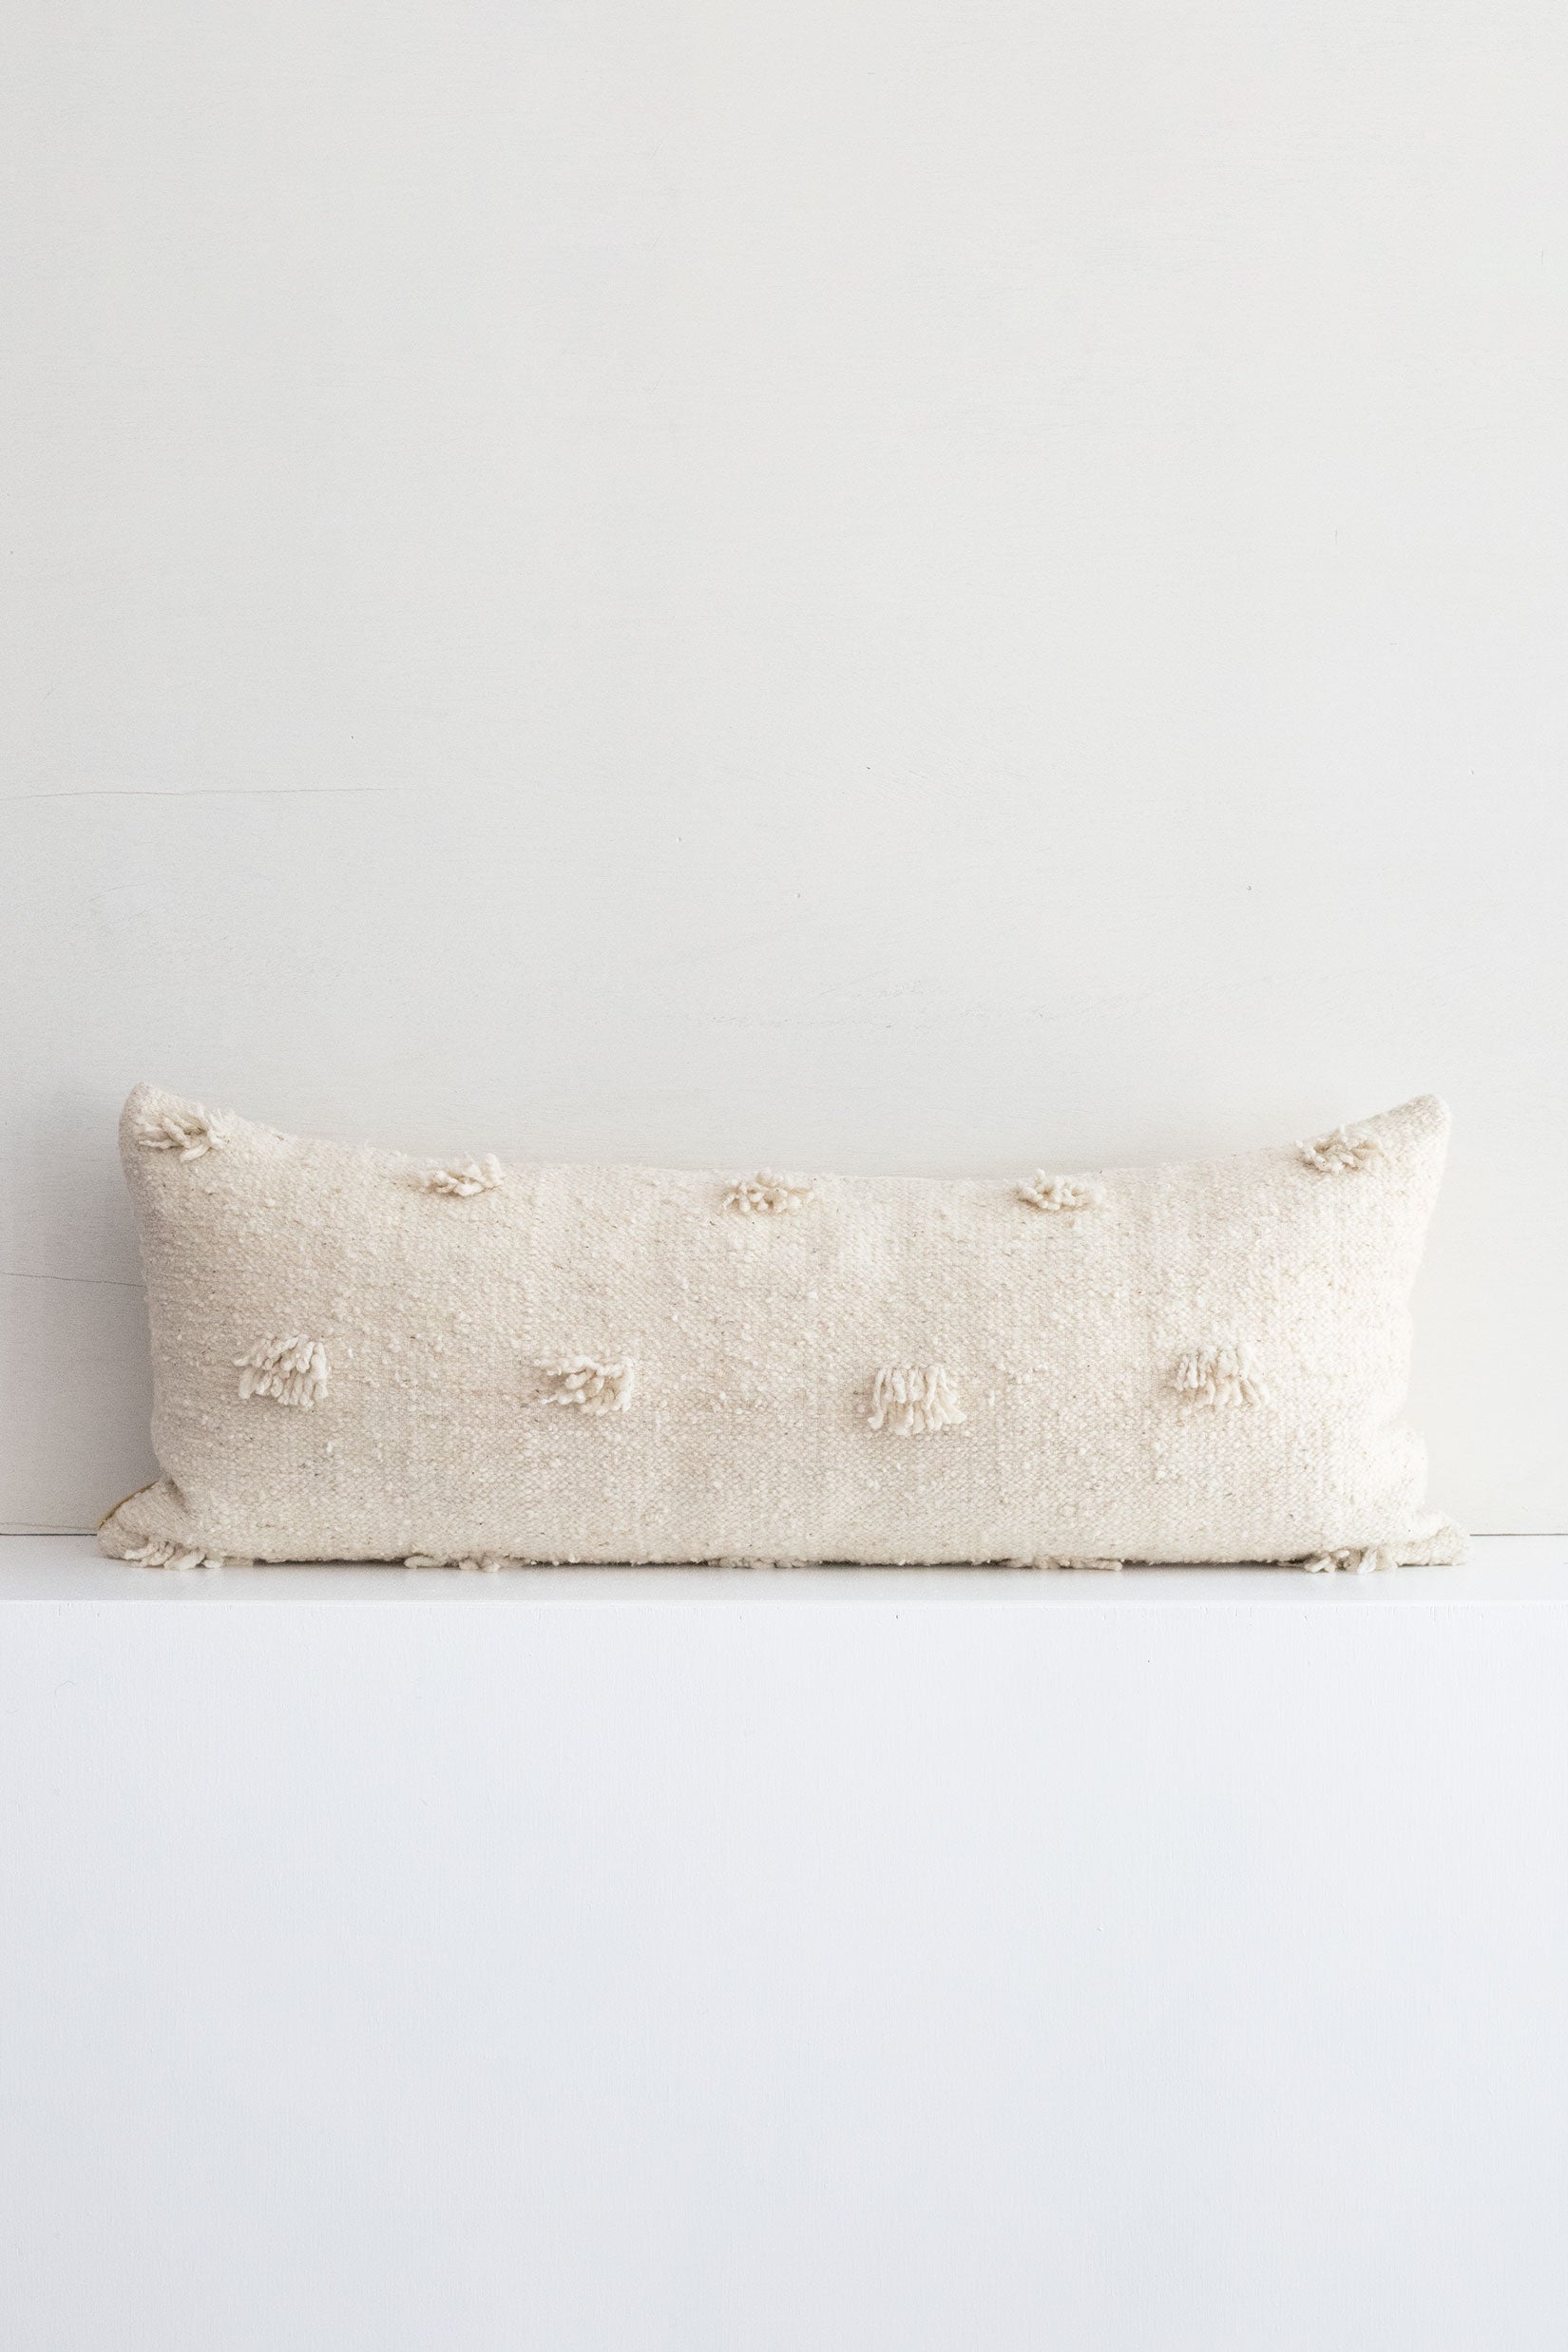 Large lumbar pillow with fringe accents throughout